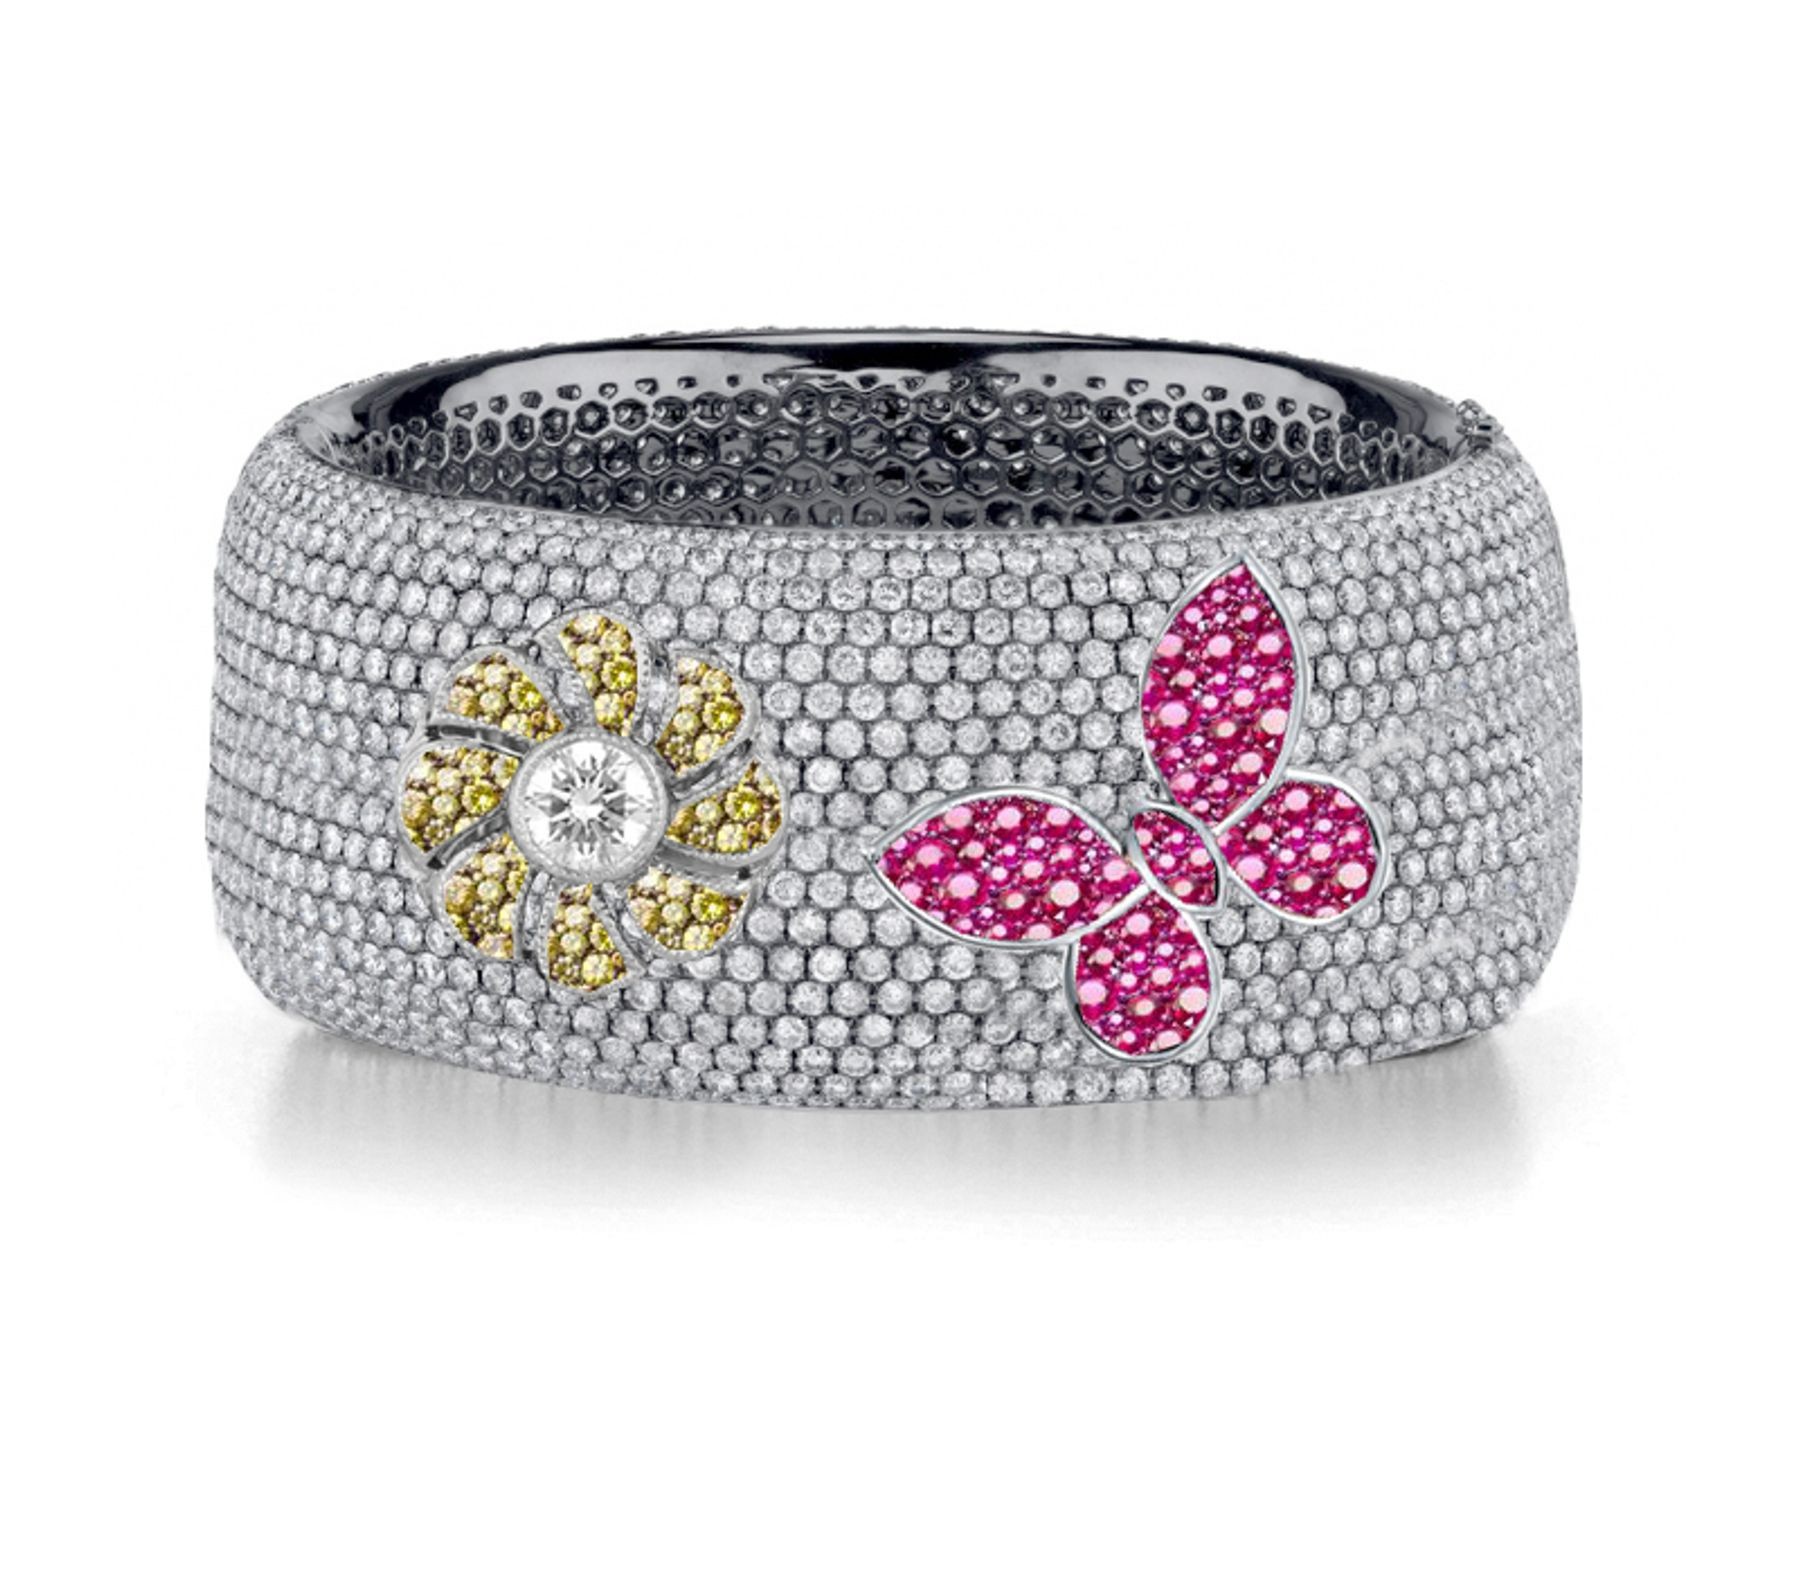 Delicate French pavee Sparkling Brilliant-Cut Round Diamonds & Vivid Multi-Colored Precious Stones Eternity Rings & Bands Featuring Vintage Flowers & Butterflies